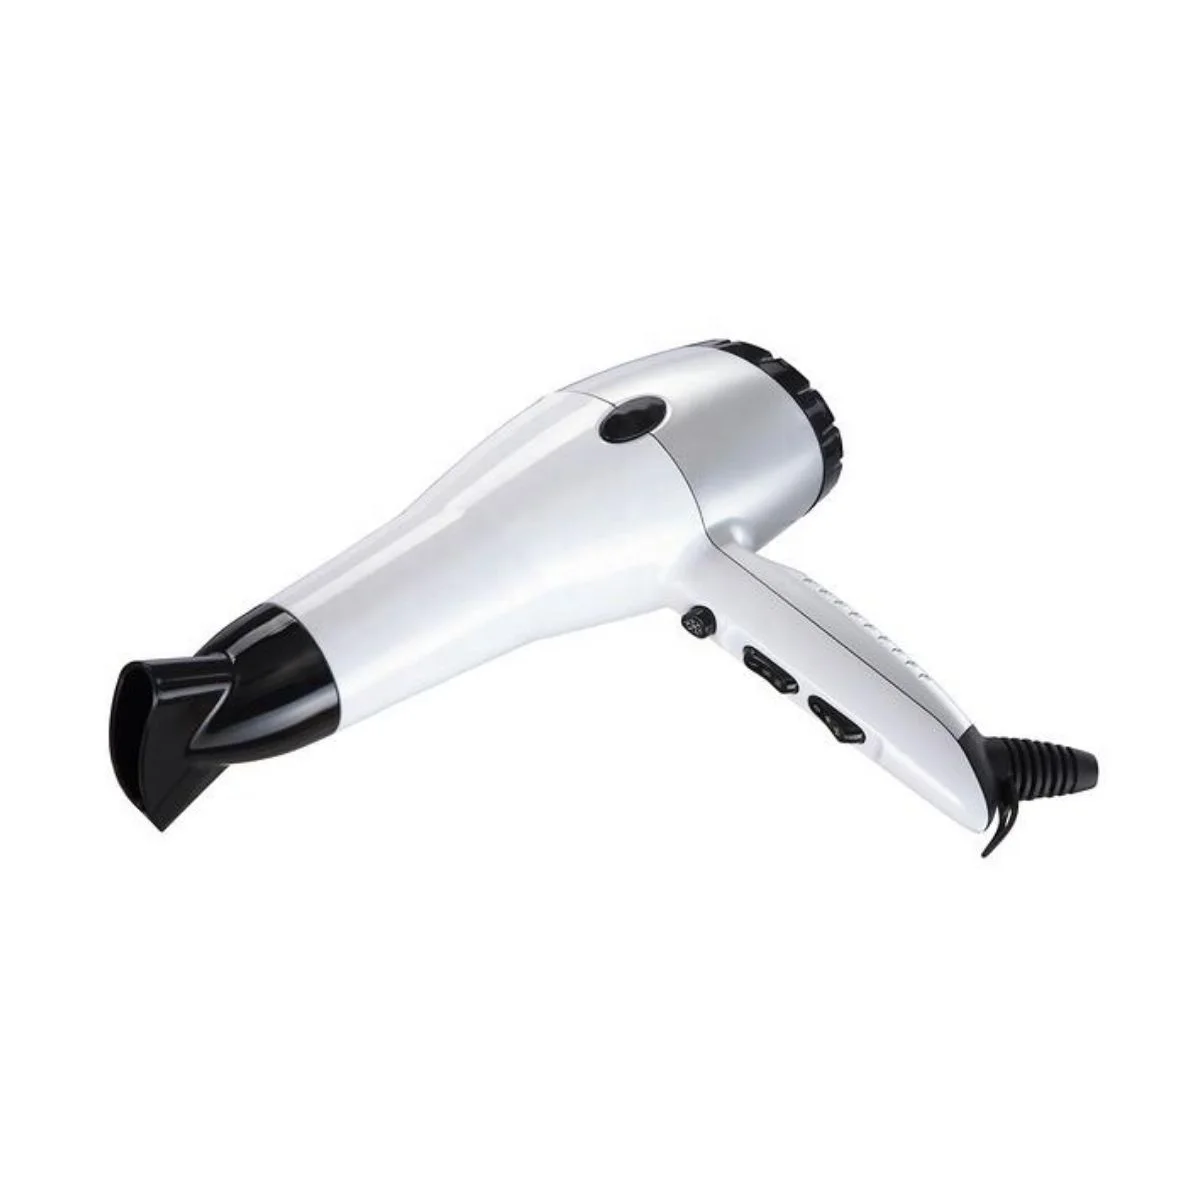 Professional Salon DC Motor Upgraded Amazing Factory Price Manufacturer Lcd Display Hair Dryer